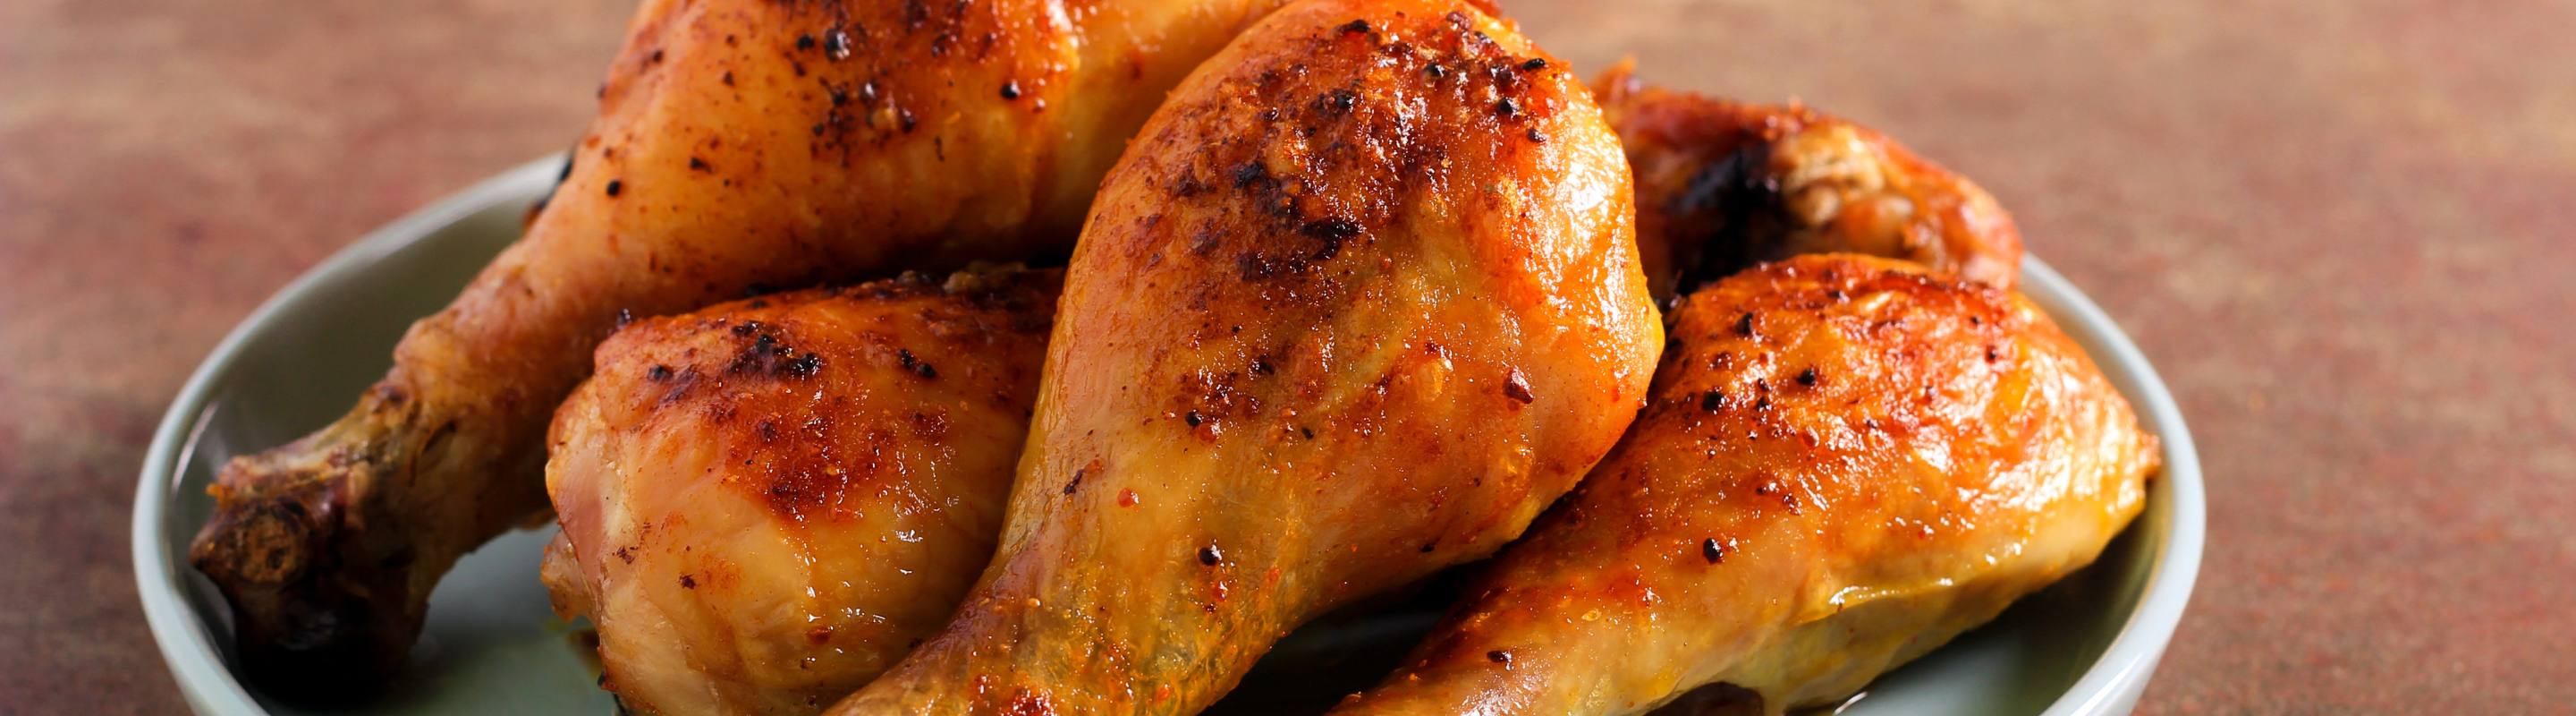 Sticky drumsticks from the Air fryer